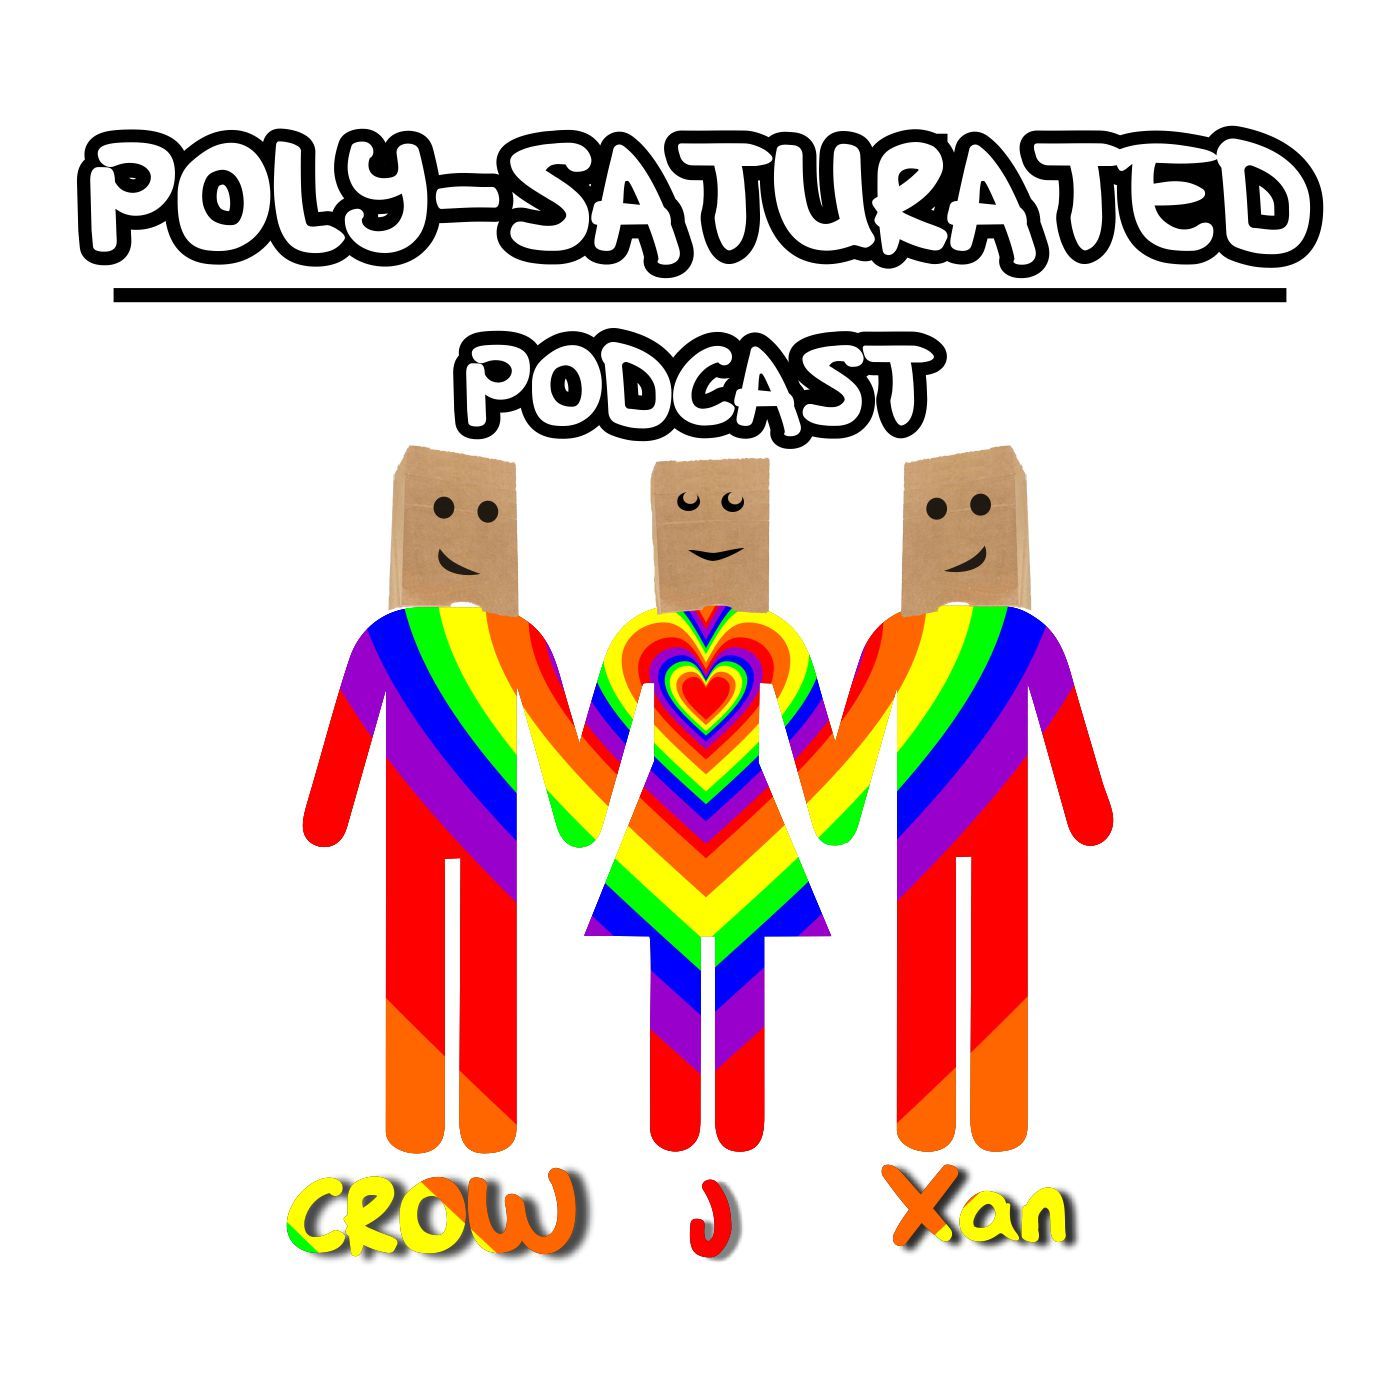 Poly-Saturated Podcast - Episde 85 - Our Amazing Listeners